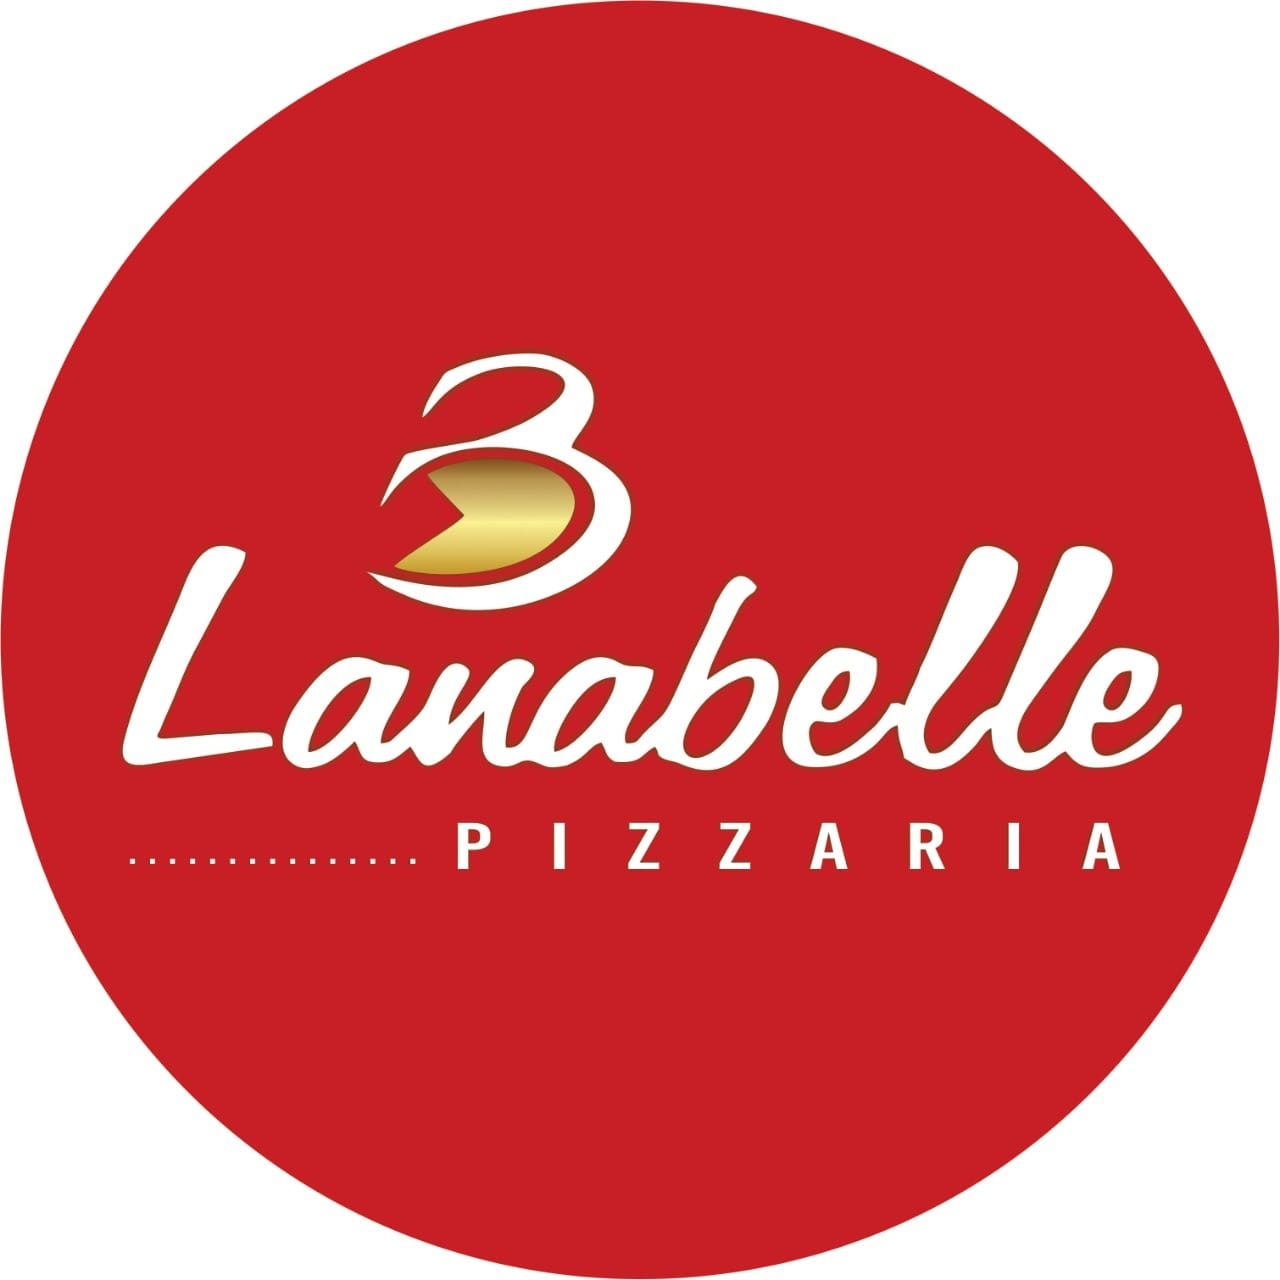 Lanabelle Pizza & Grill